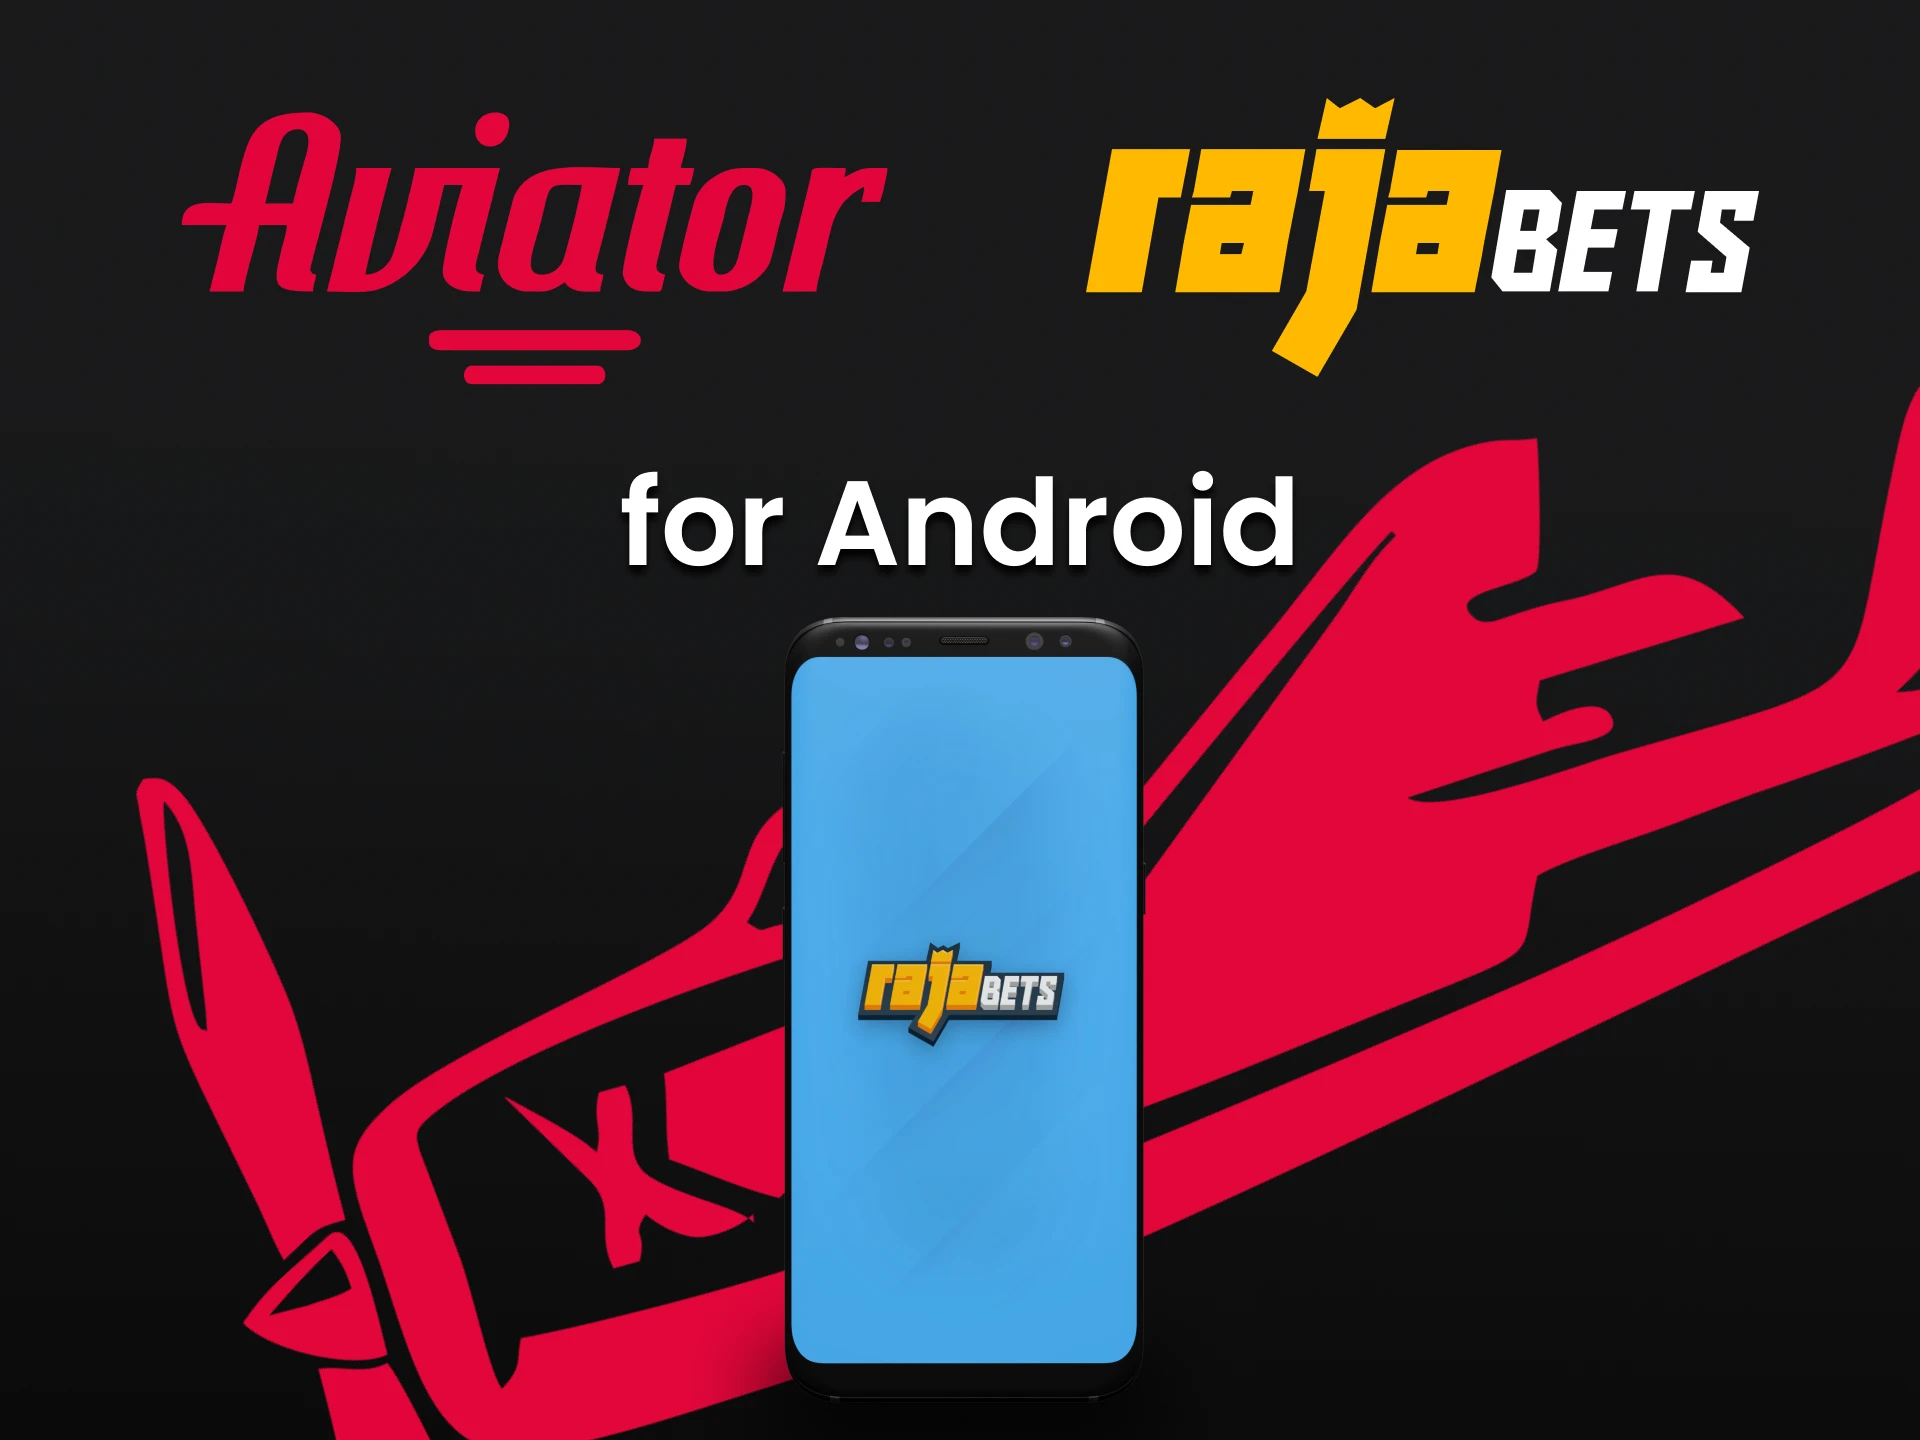 Install the application for android from Rajabets for Aviator.